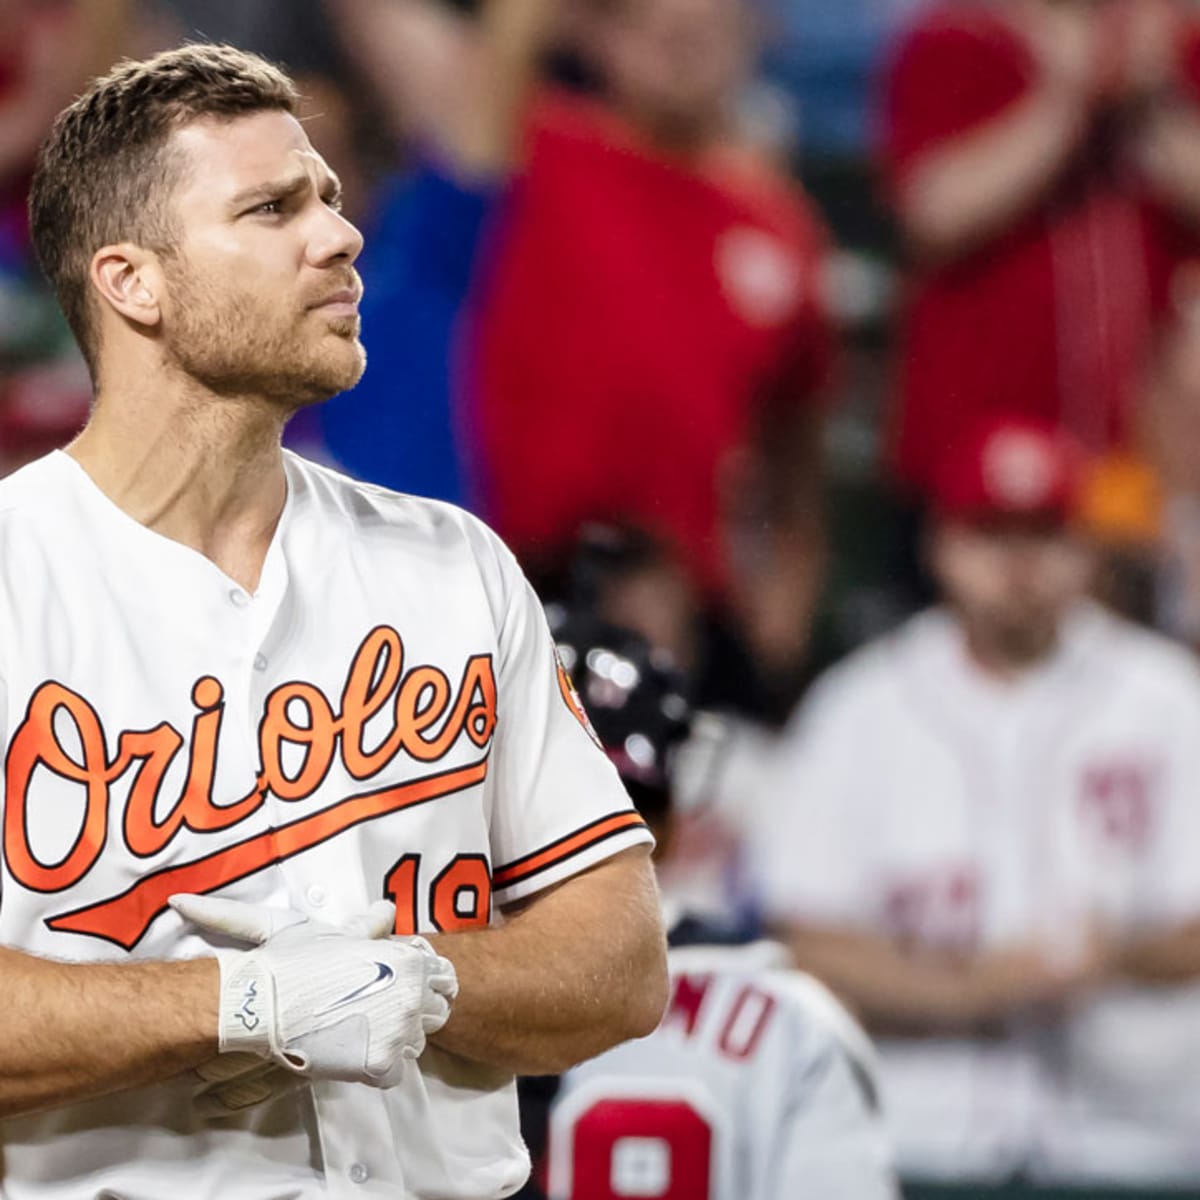 0-for-ever: Orioles' Chris Davis extends hitless streak to record 49 at-bats